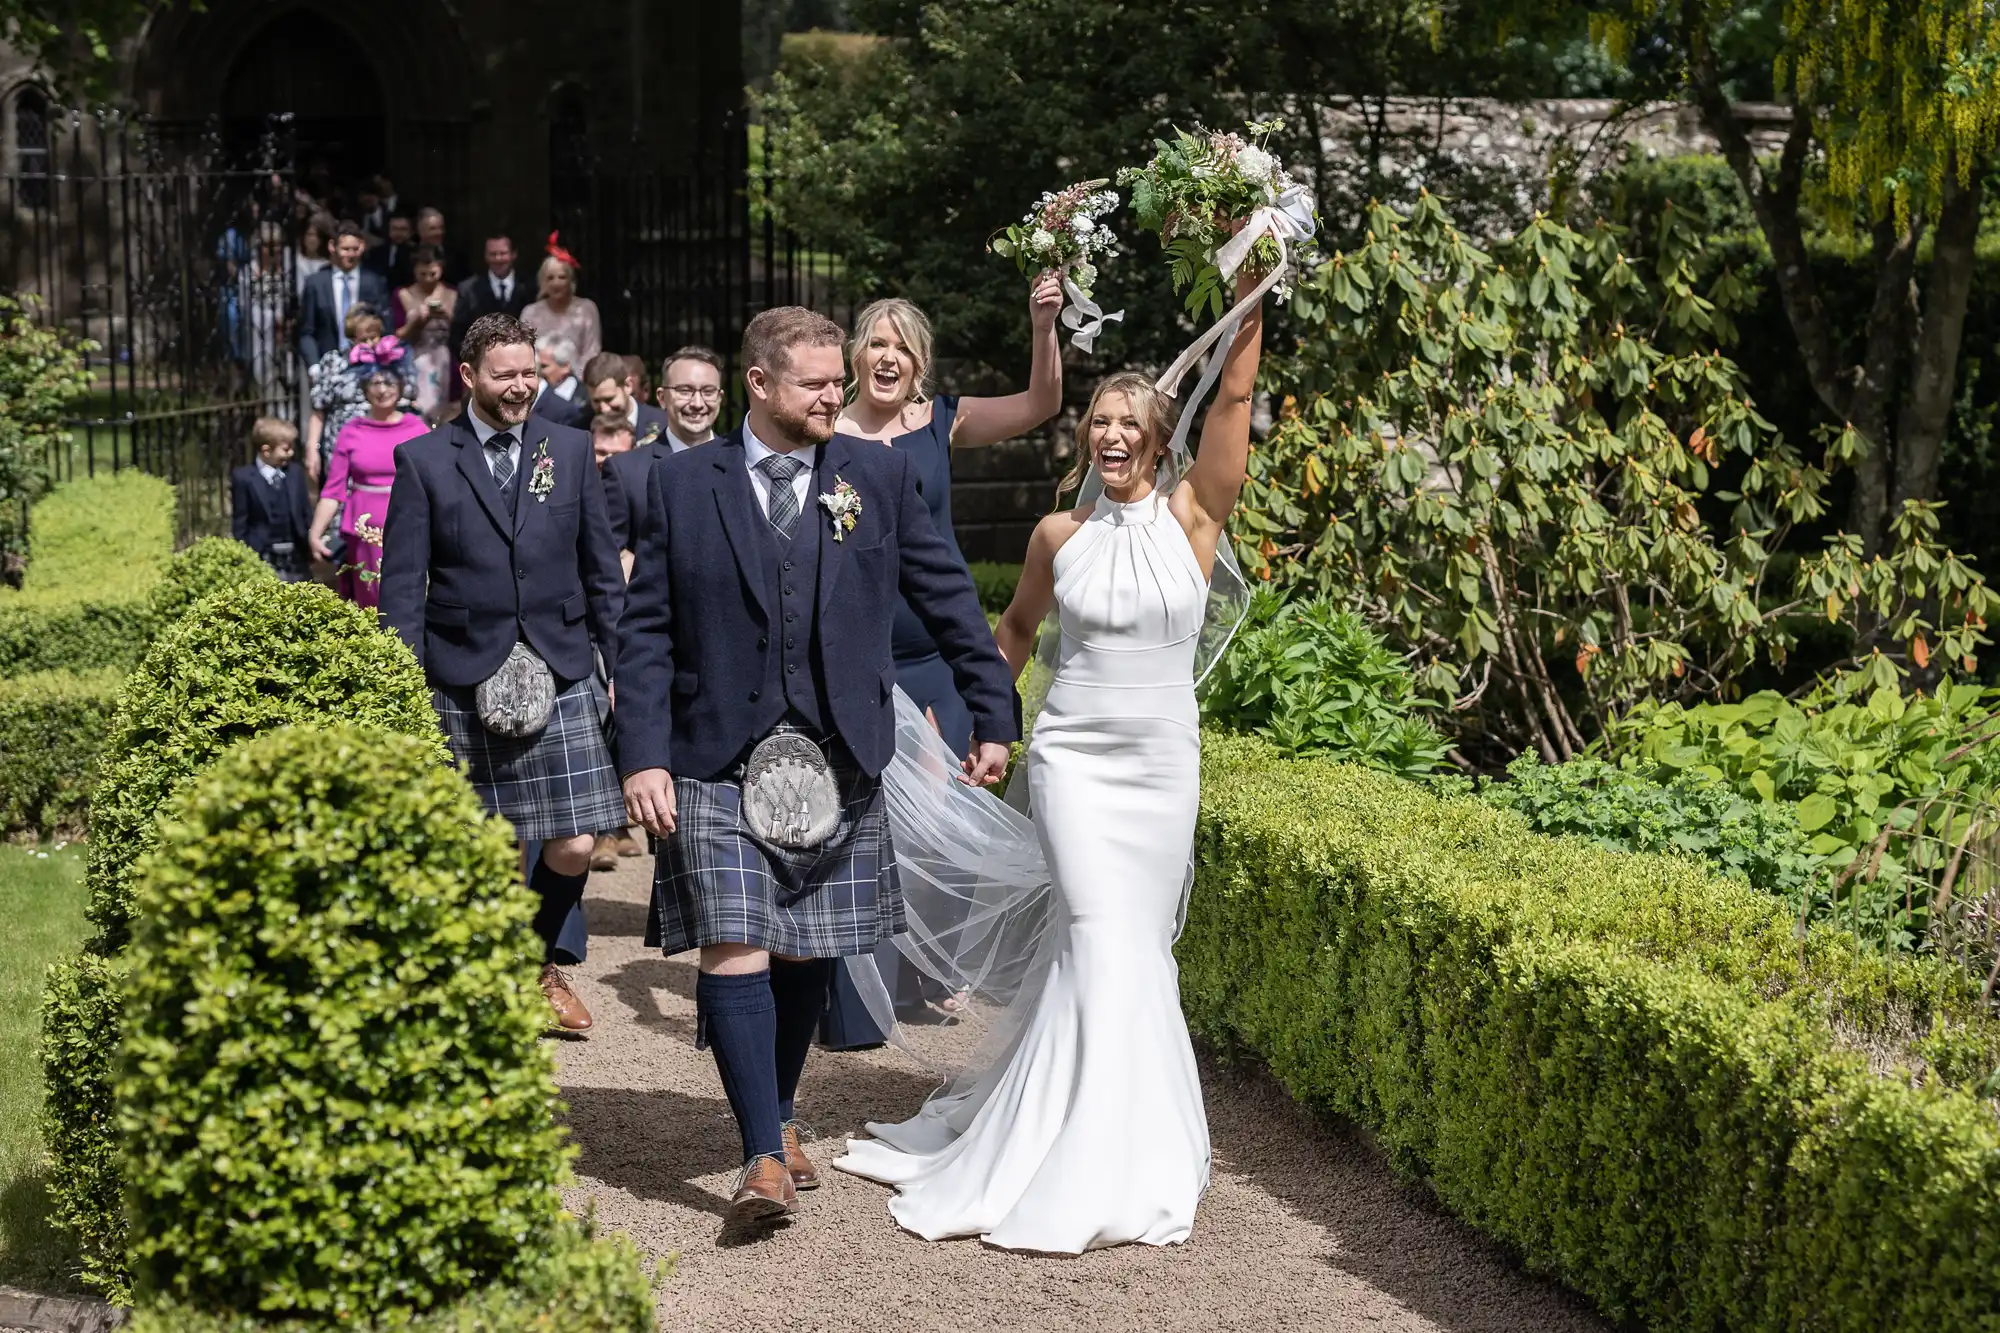 A joyful bride and groom walk hand in hand, leading guests down a garden path after their wedding ceremony.